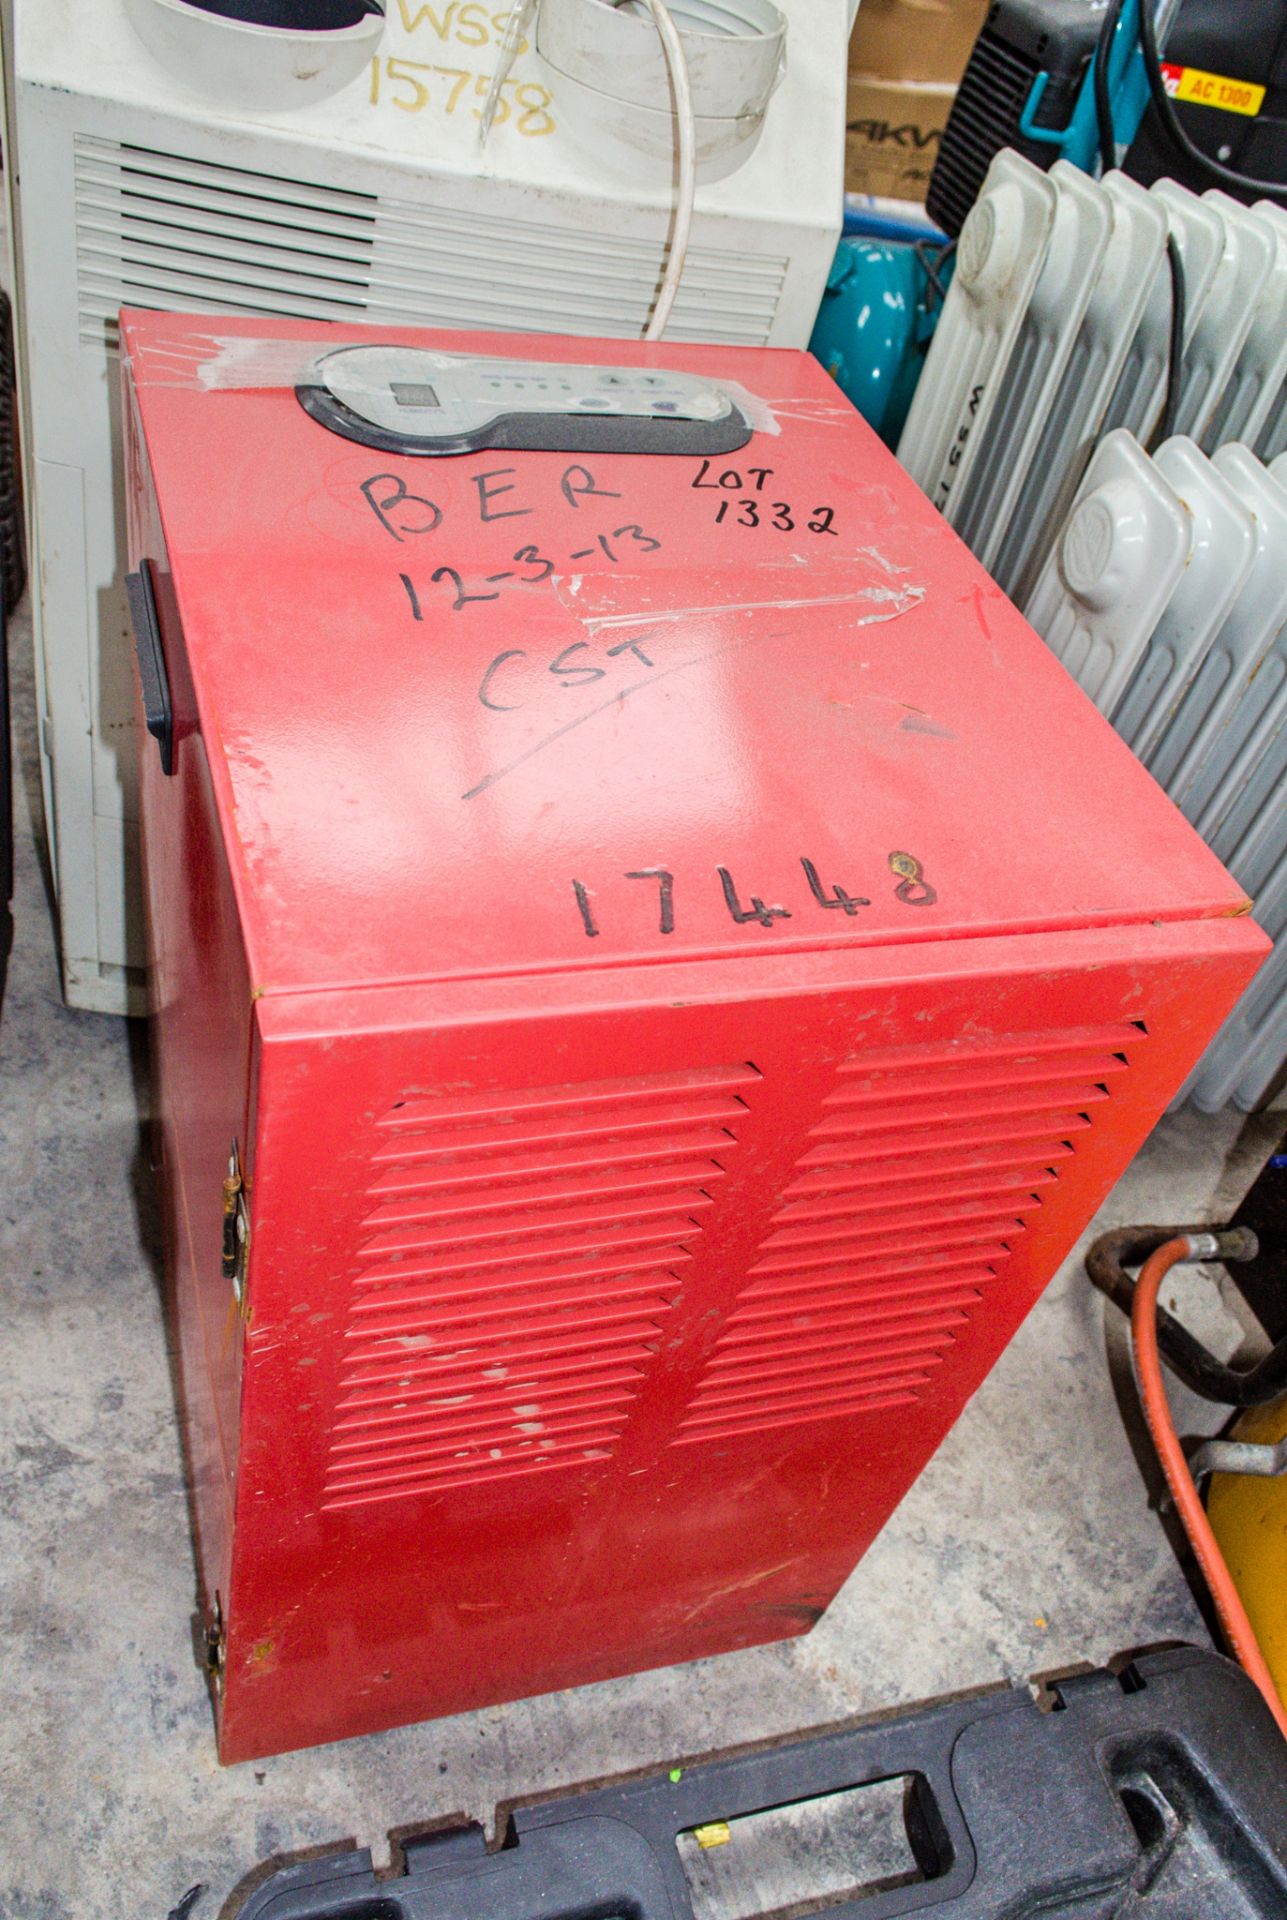 Air conditioning & dehumidifiers ** Both for spares ** - Image 2 of 2